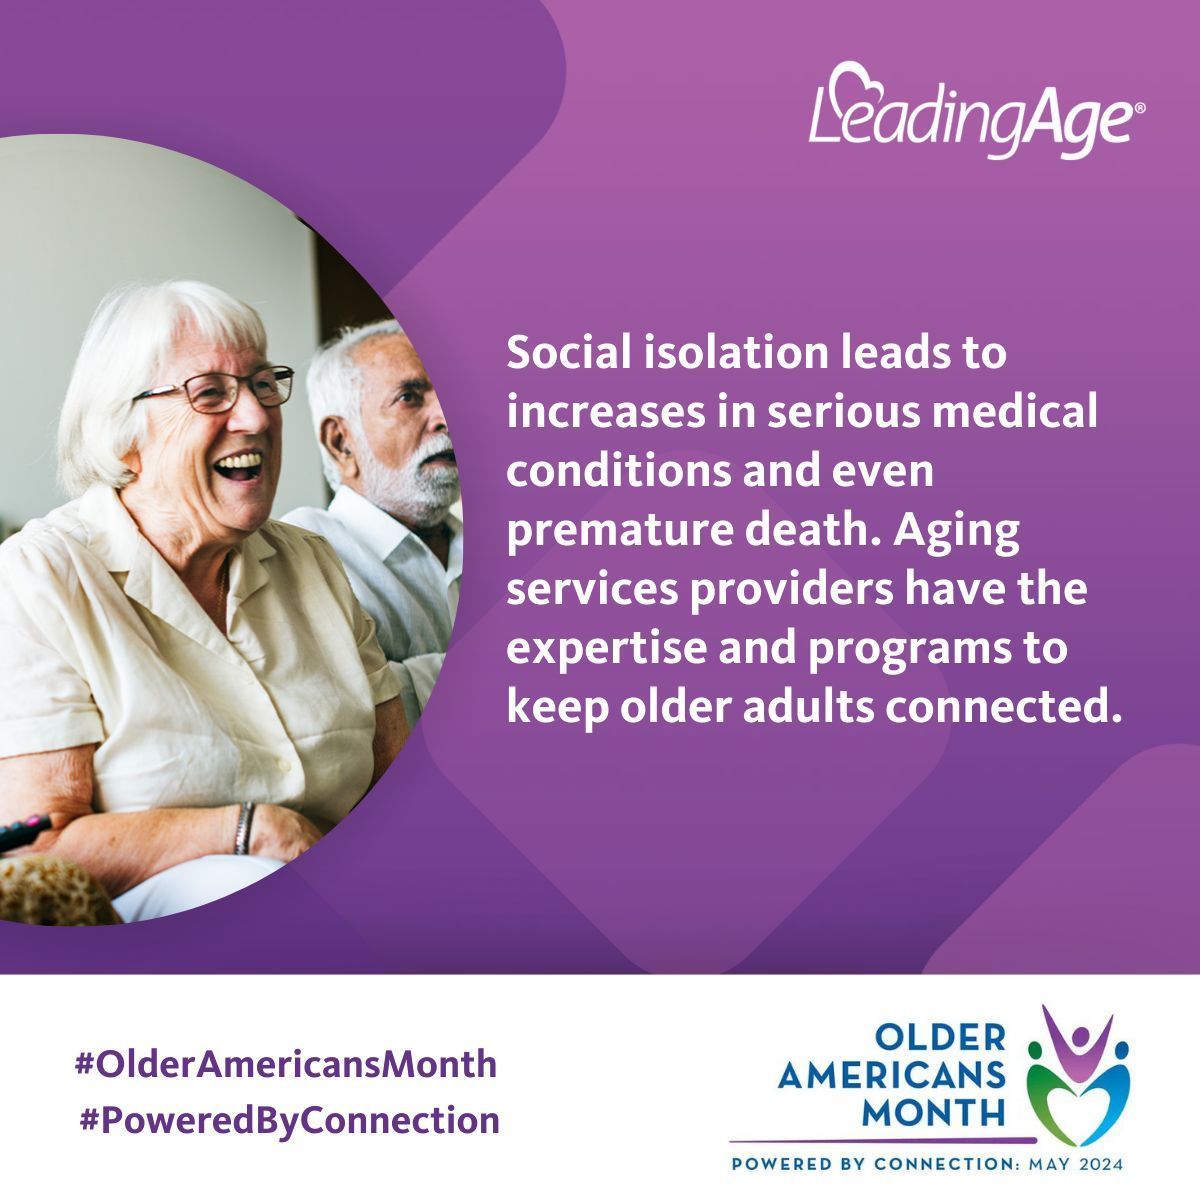 LeadingAge is #PoweredByConnection all year long. Are you part of a provider-specific Member Network or have you joined a Peer Group to connect with other professionals specializing in HR, technology, workforce, or other fields? buff.ly/3WiQADI #OlderAmericansMonth